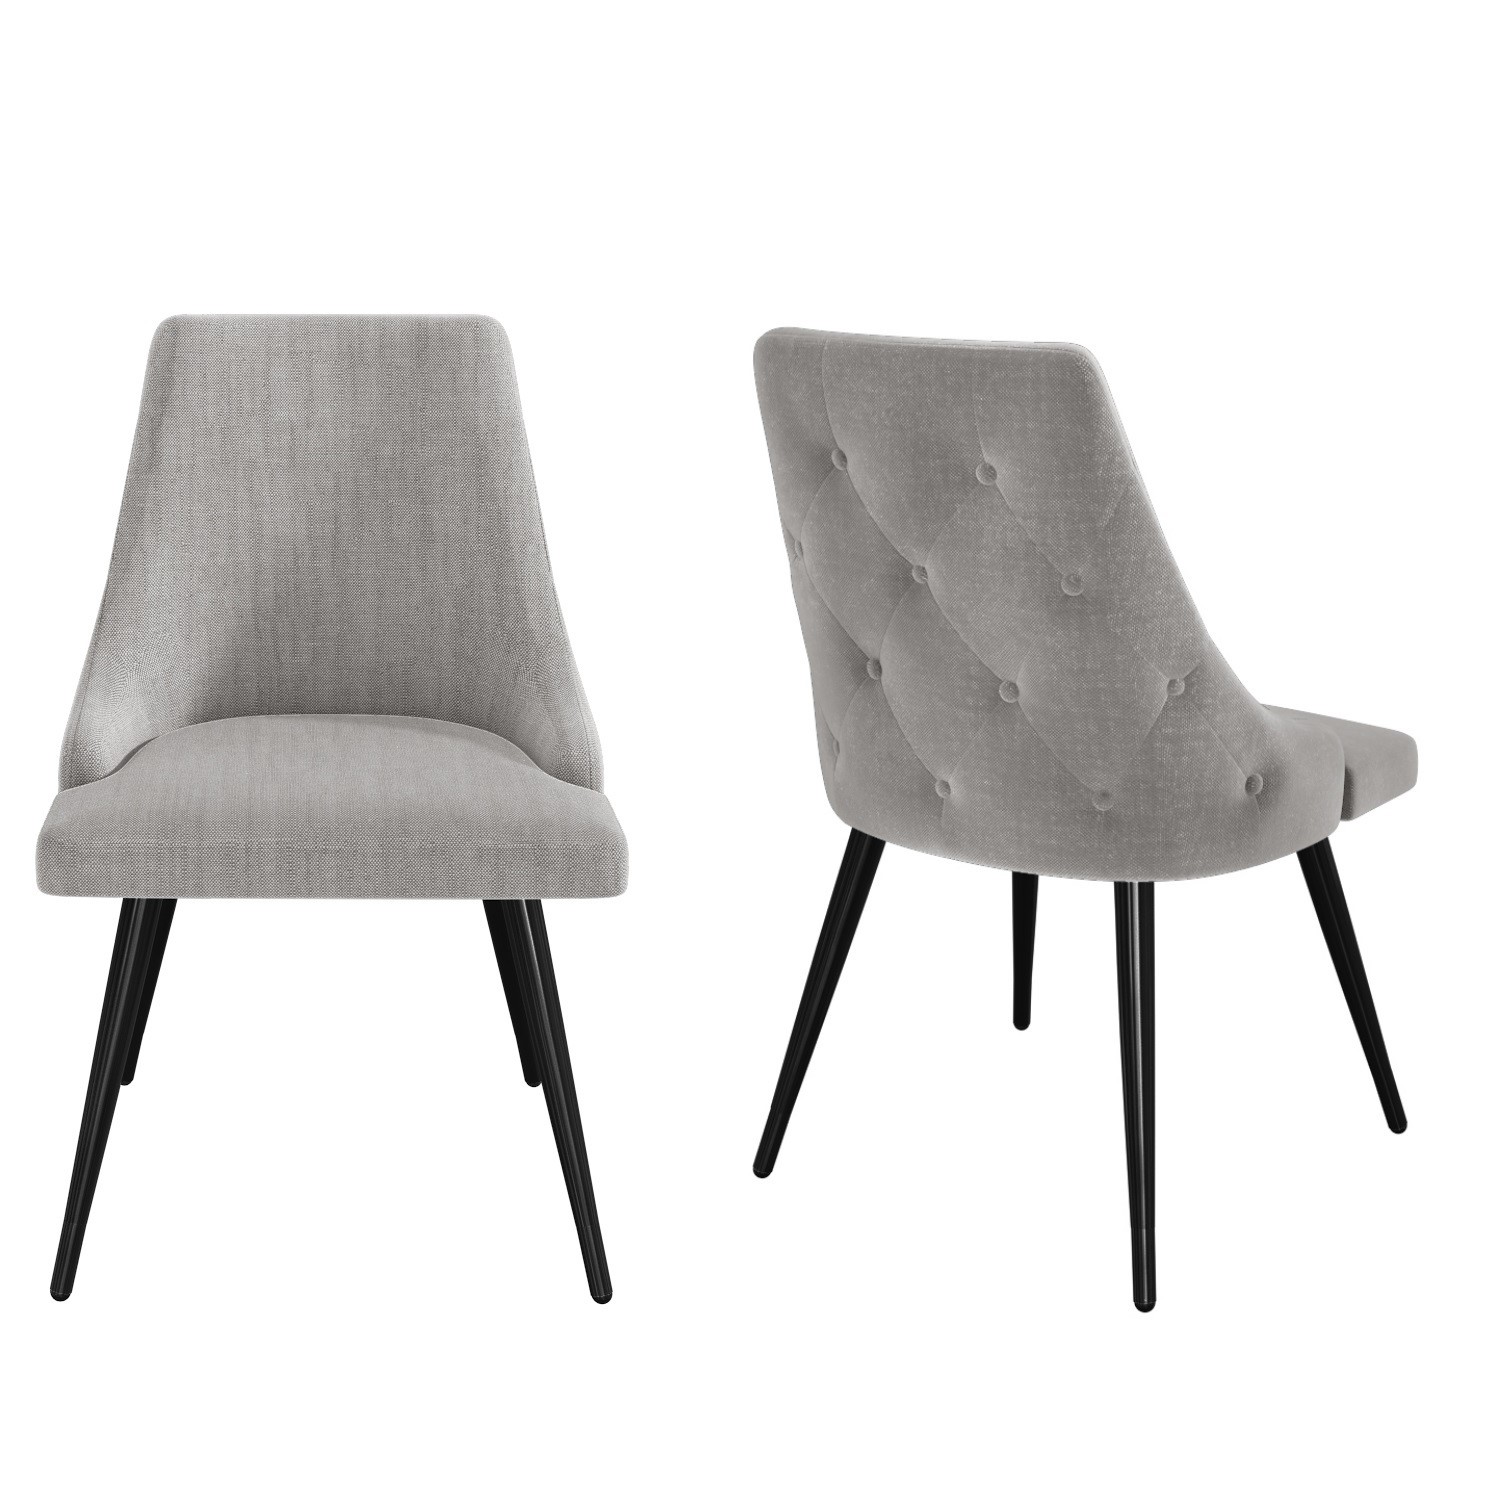 Pair Of Light Grey Fabric Dining Chairs, Grey Fabric Dining Chairs White Legs